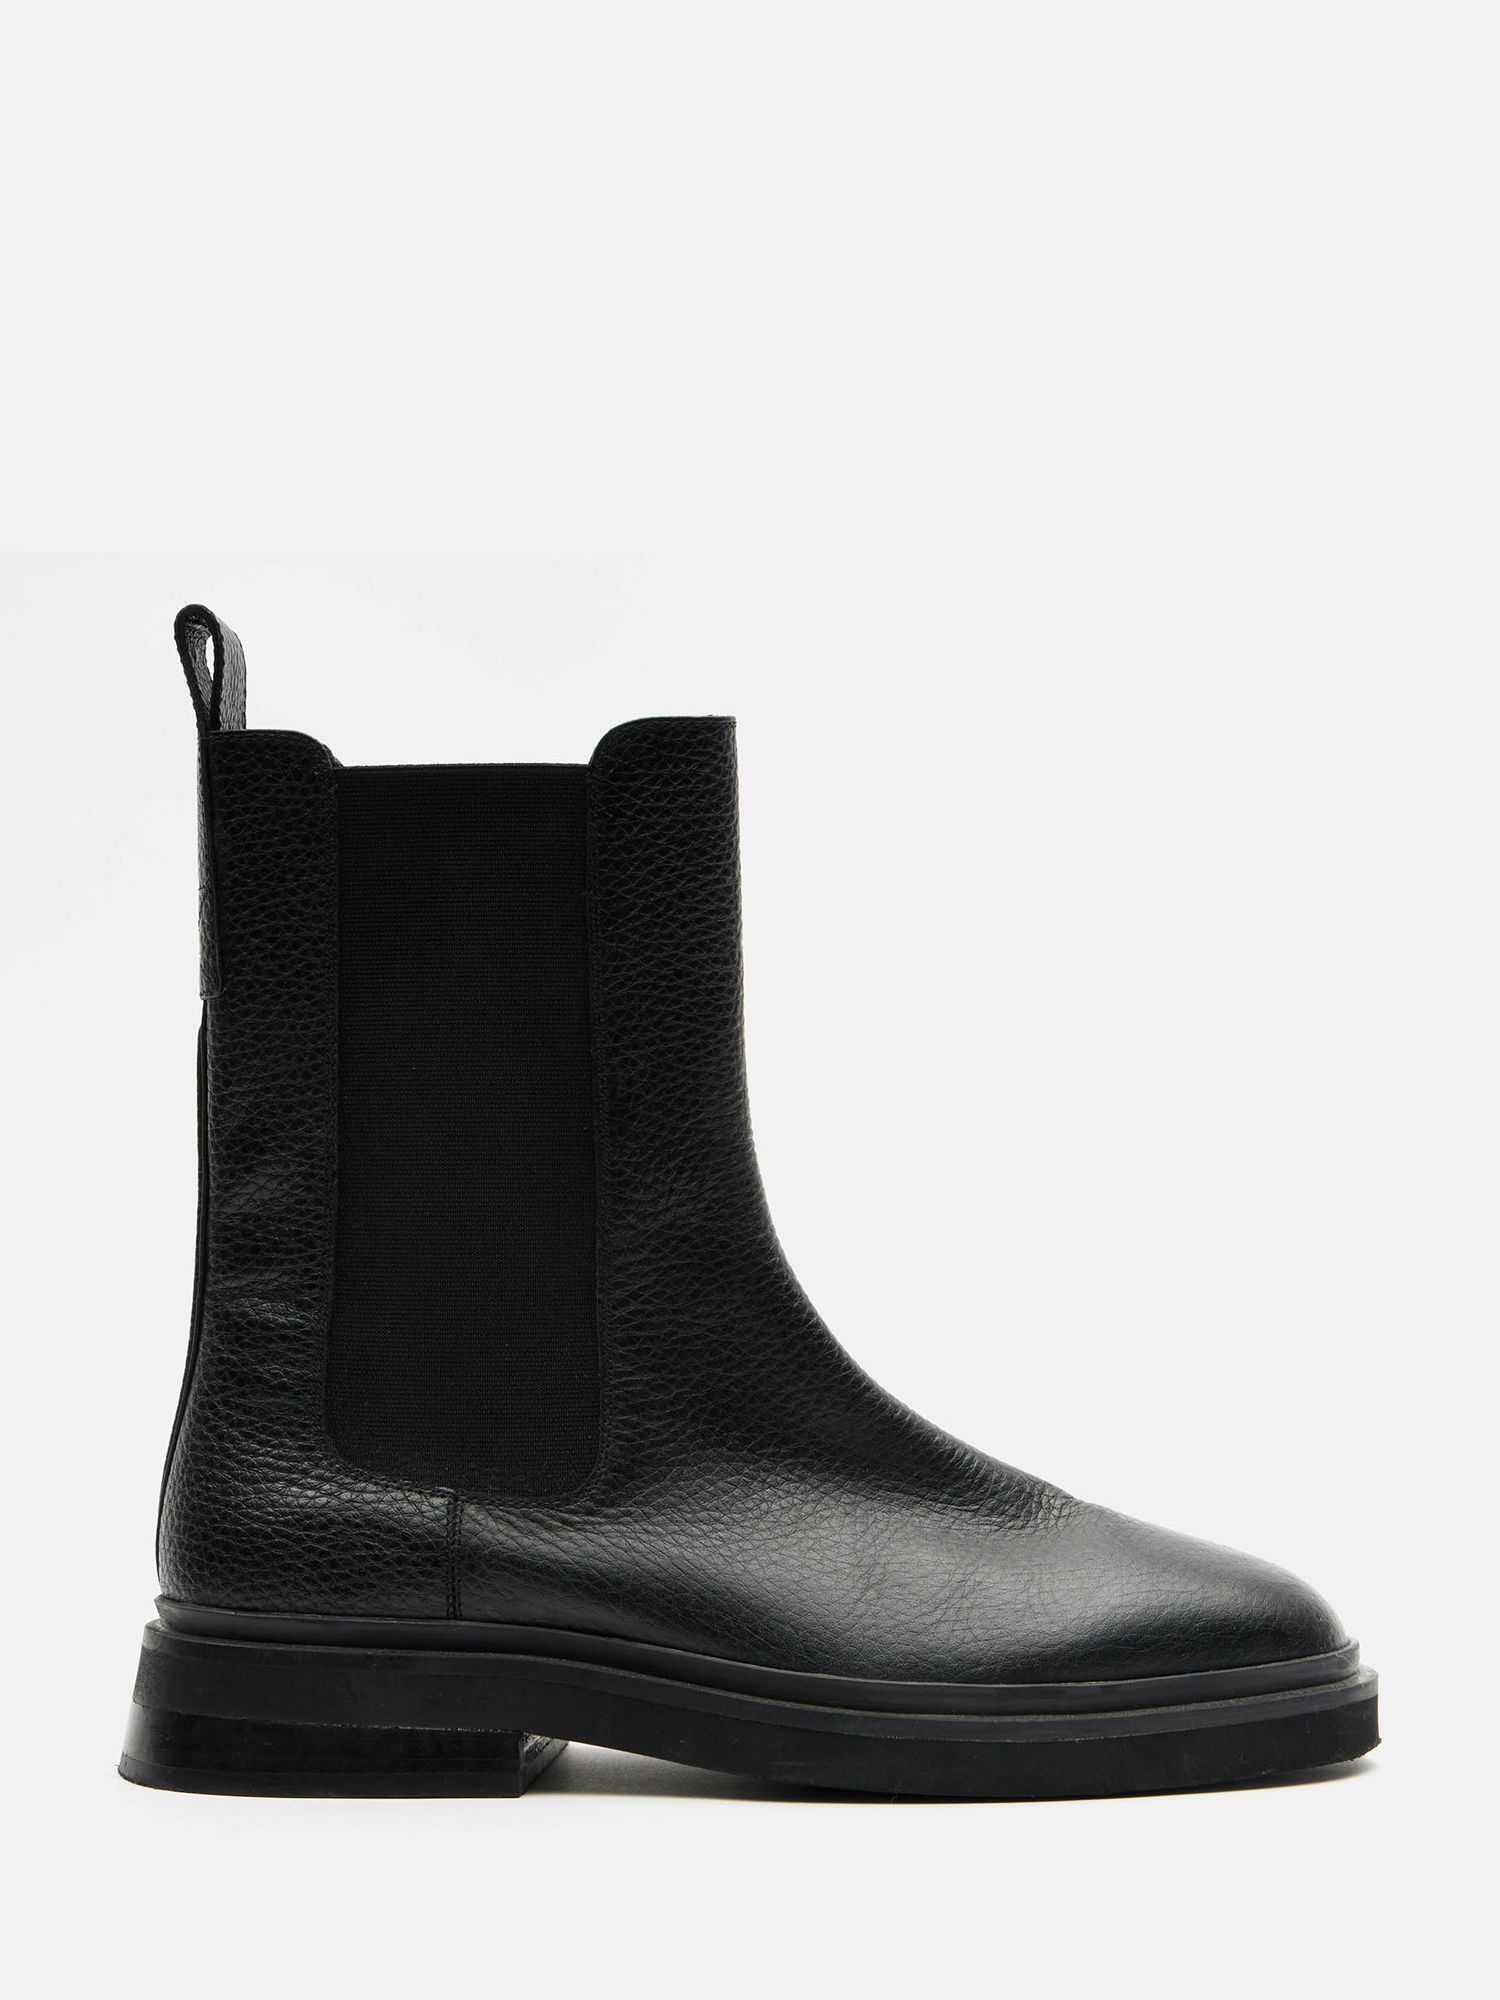 HUSH Aaliyah Leather Chelsea Boots, Black at John Lewis & Partners